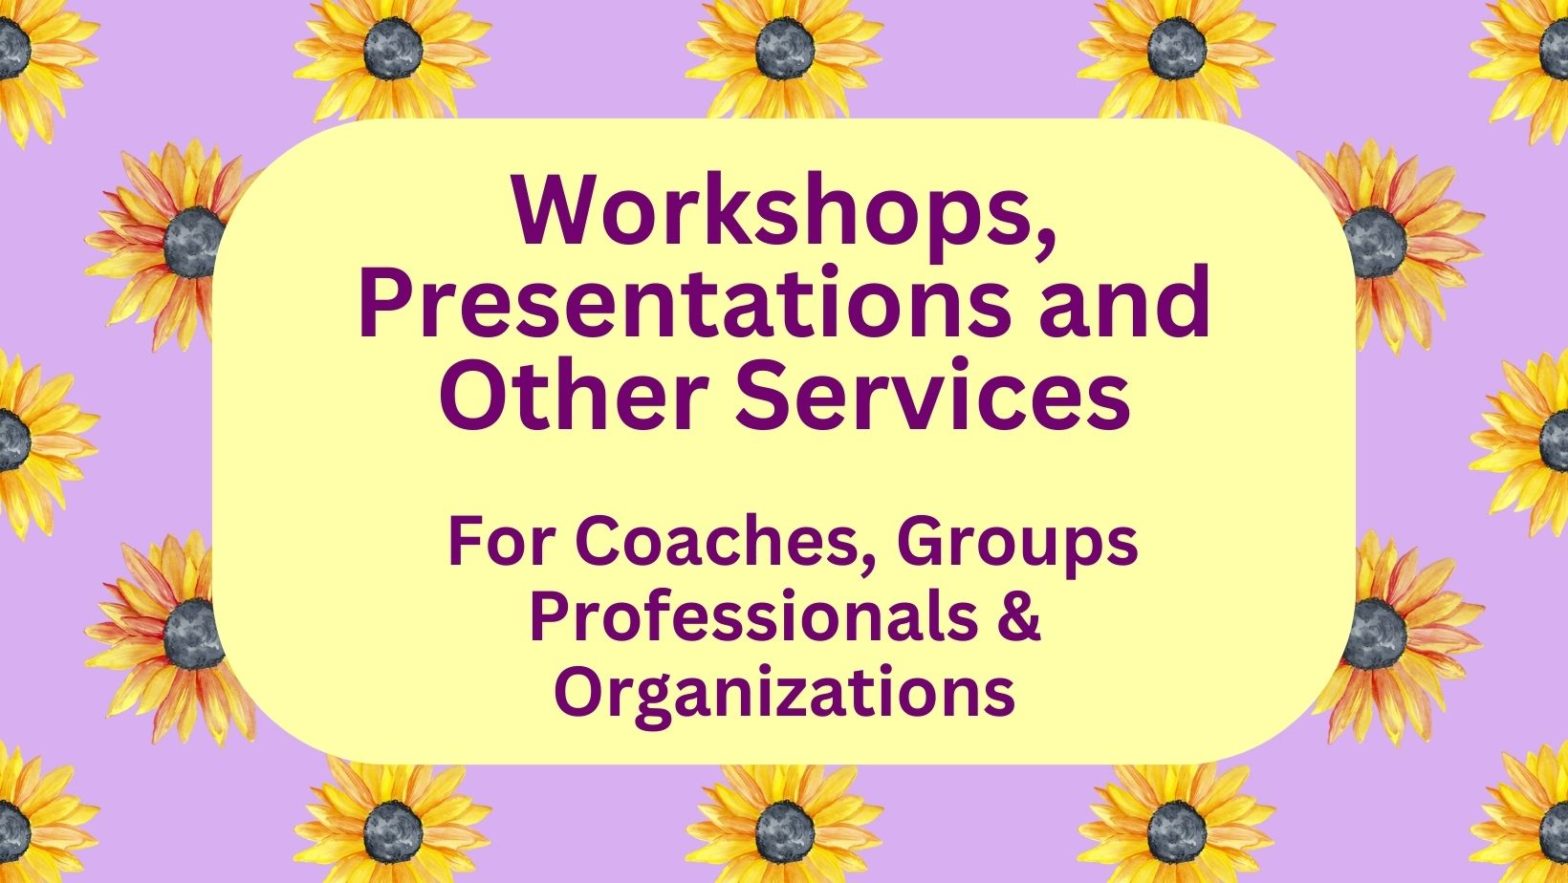 Workshops, Presentations, and Other Services For Coaches, Groups, Professionals and Organizations